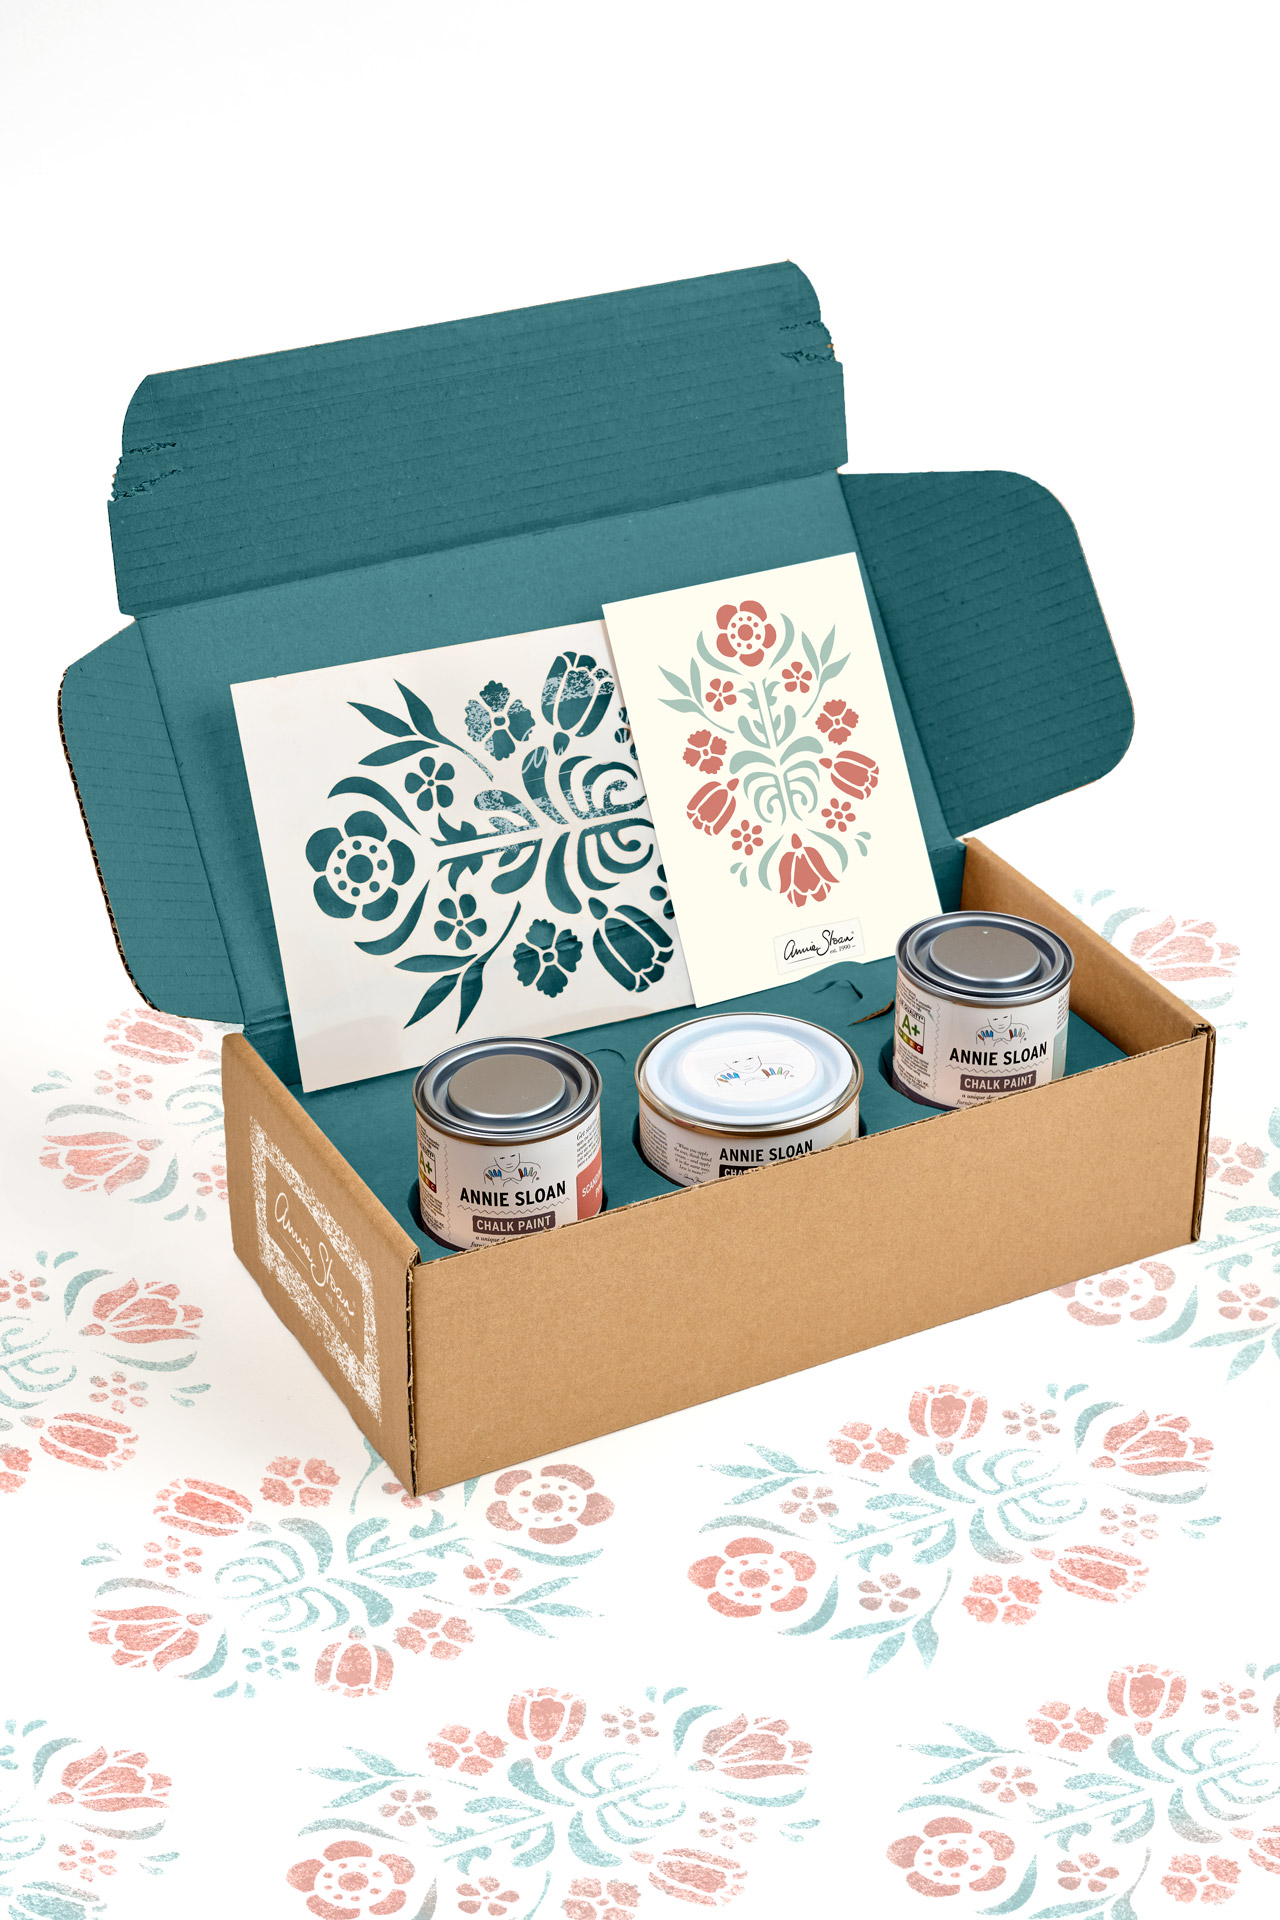 Annie Sloan Scandinavian Stencil Gift Kit Product Image